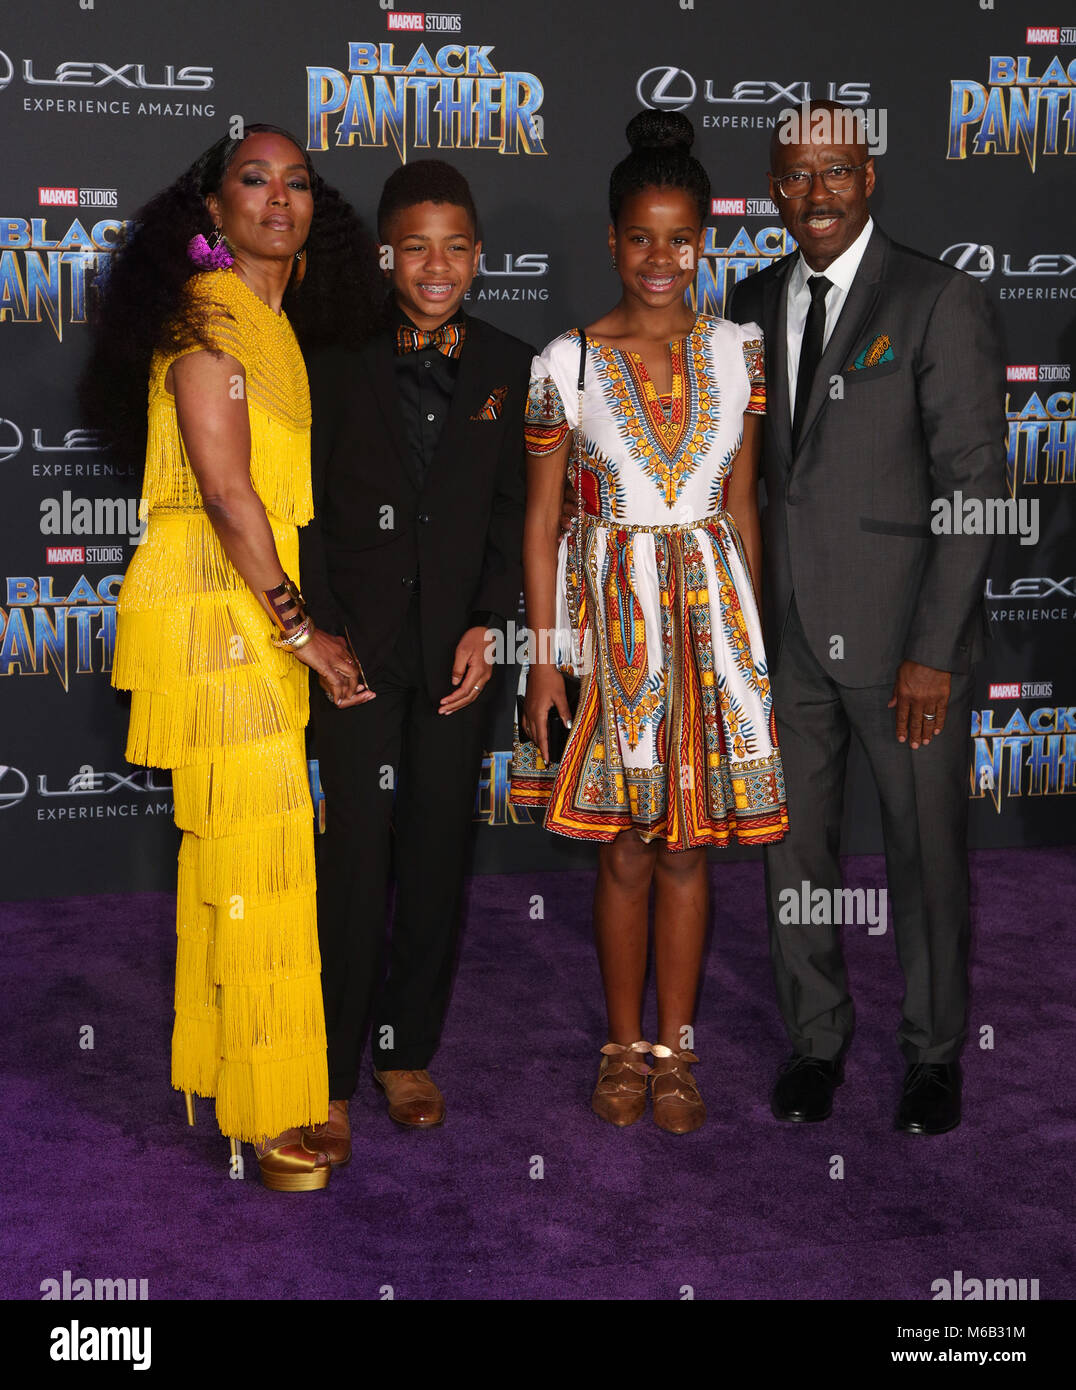 Celebrities attend  World Premiere of Marvel Studios Black Panther at Dolby Theatre.  Featuring: Angela Bassett, Slater Vance, Bronwyn Vance, Courtney B. Vance Where: Los Angeles, California, United States When: 30 Jan 2018 Credit: Brian To/WENN.com Stock Photo